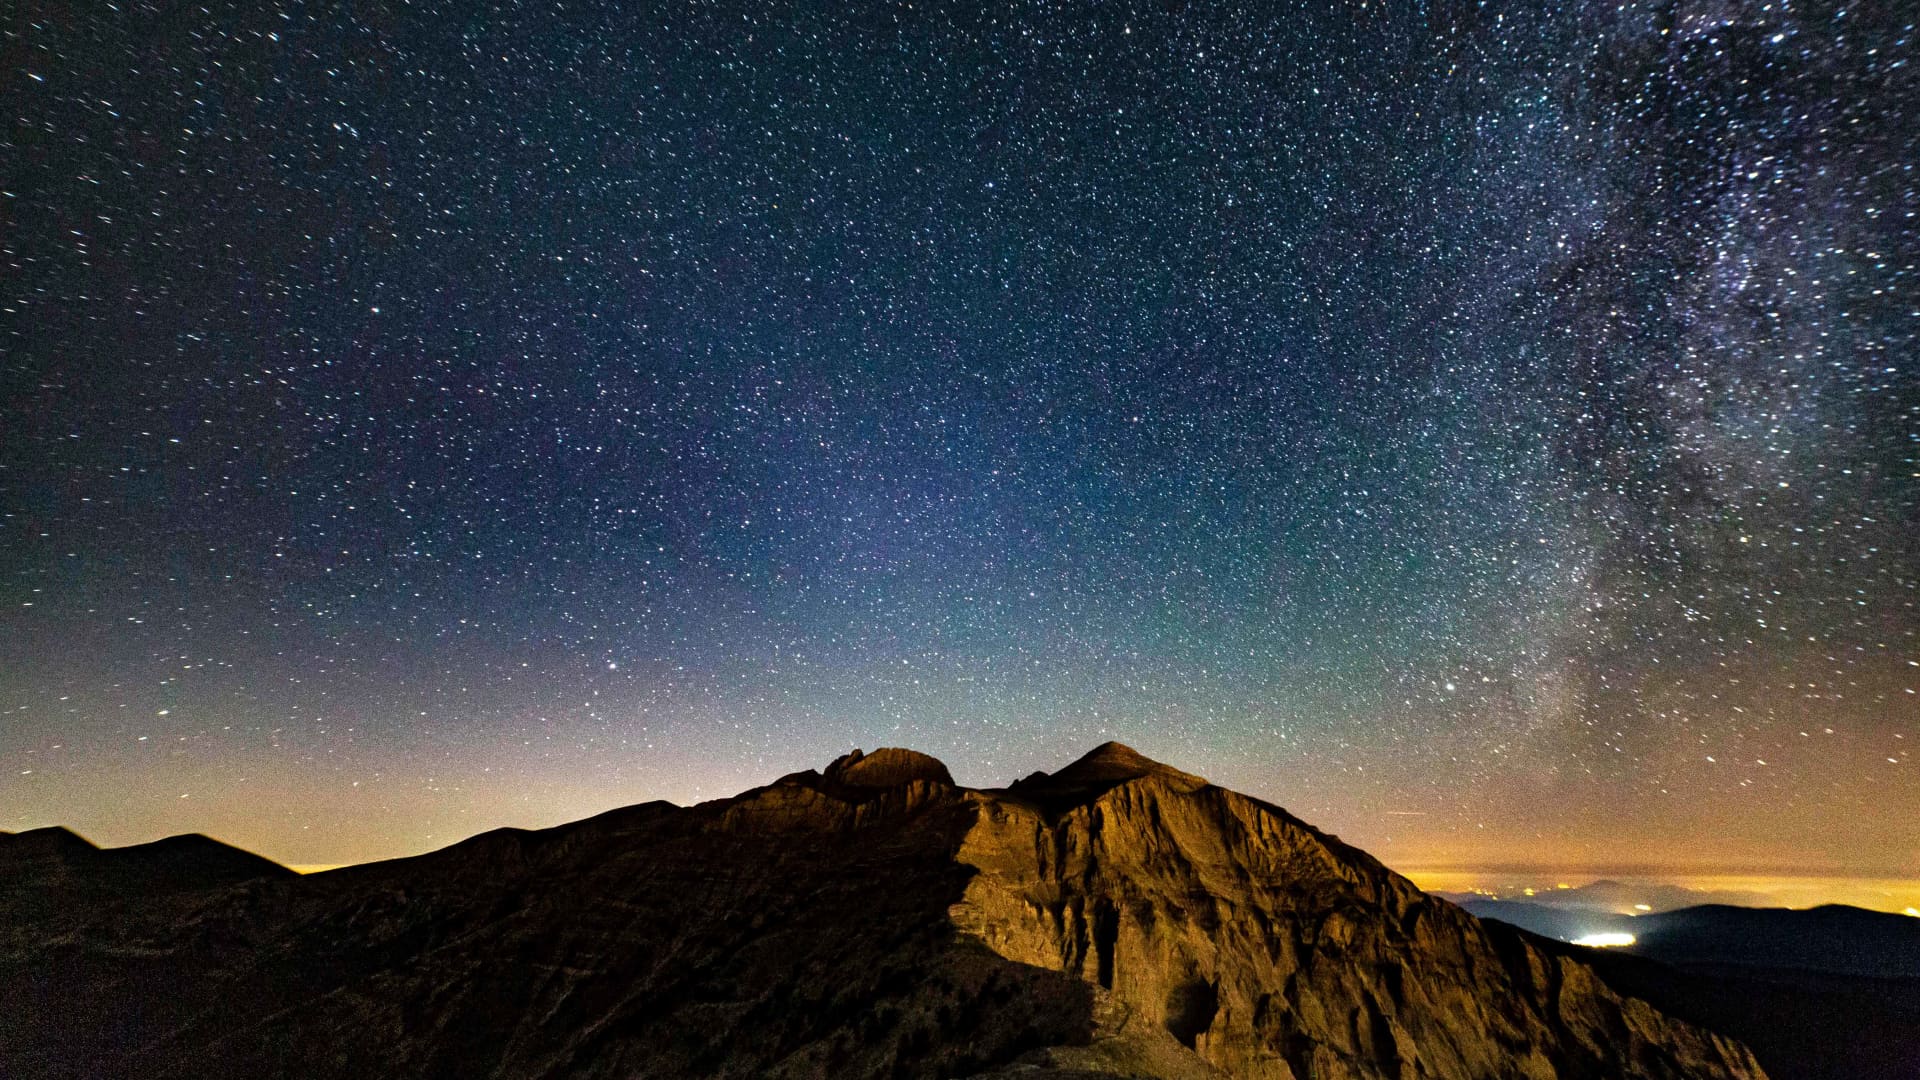 Dark sky tourism focuses on rural locations without light pollution, such as Greece's Olympus Mountain National Park.